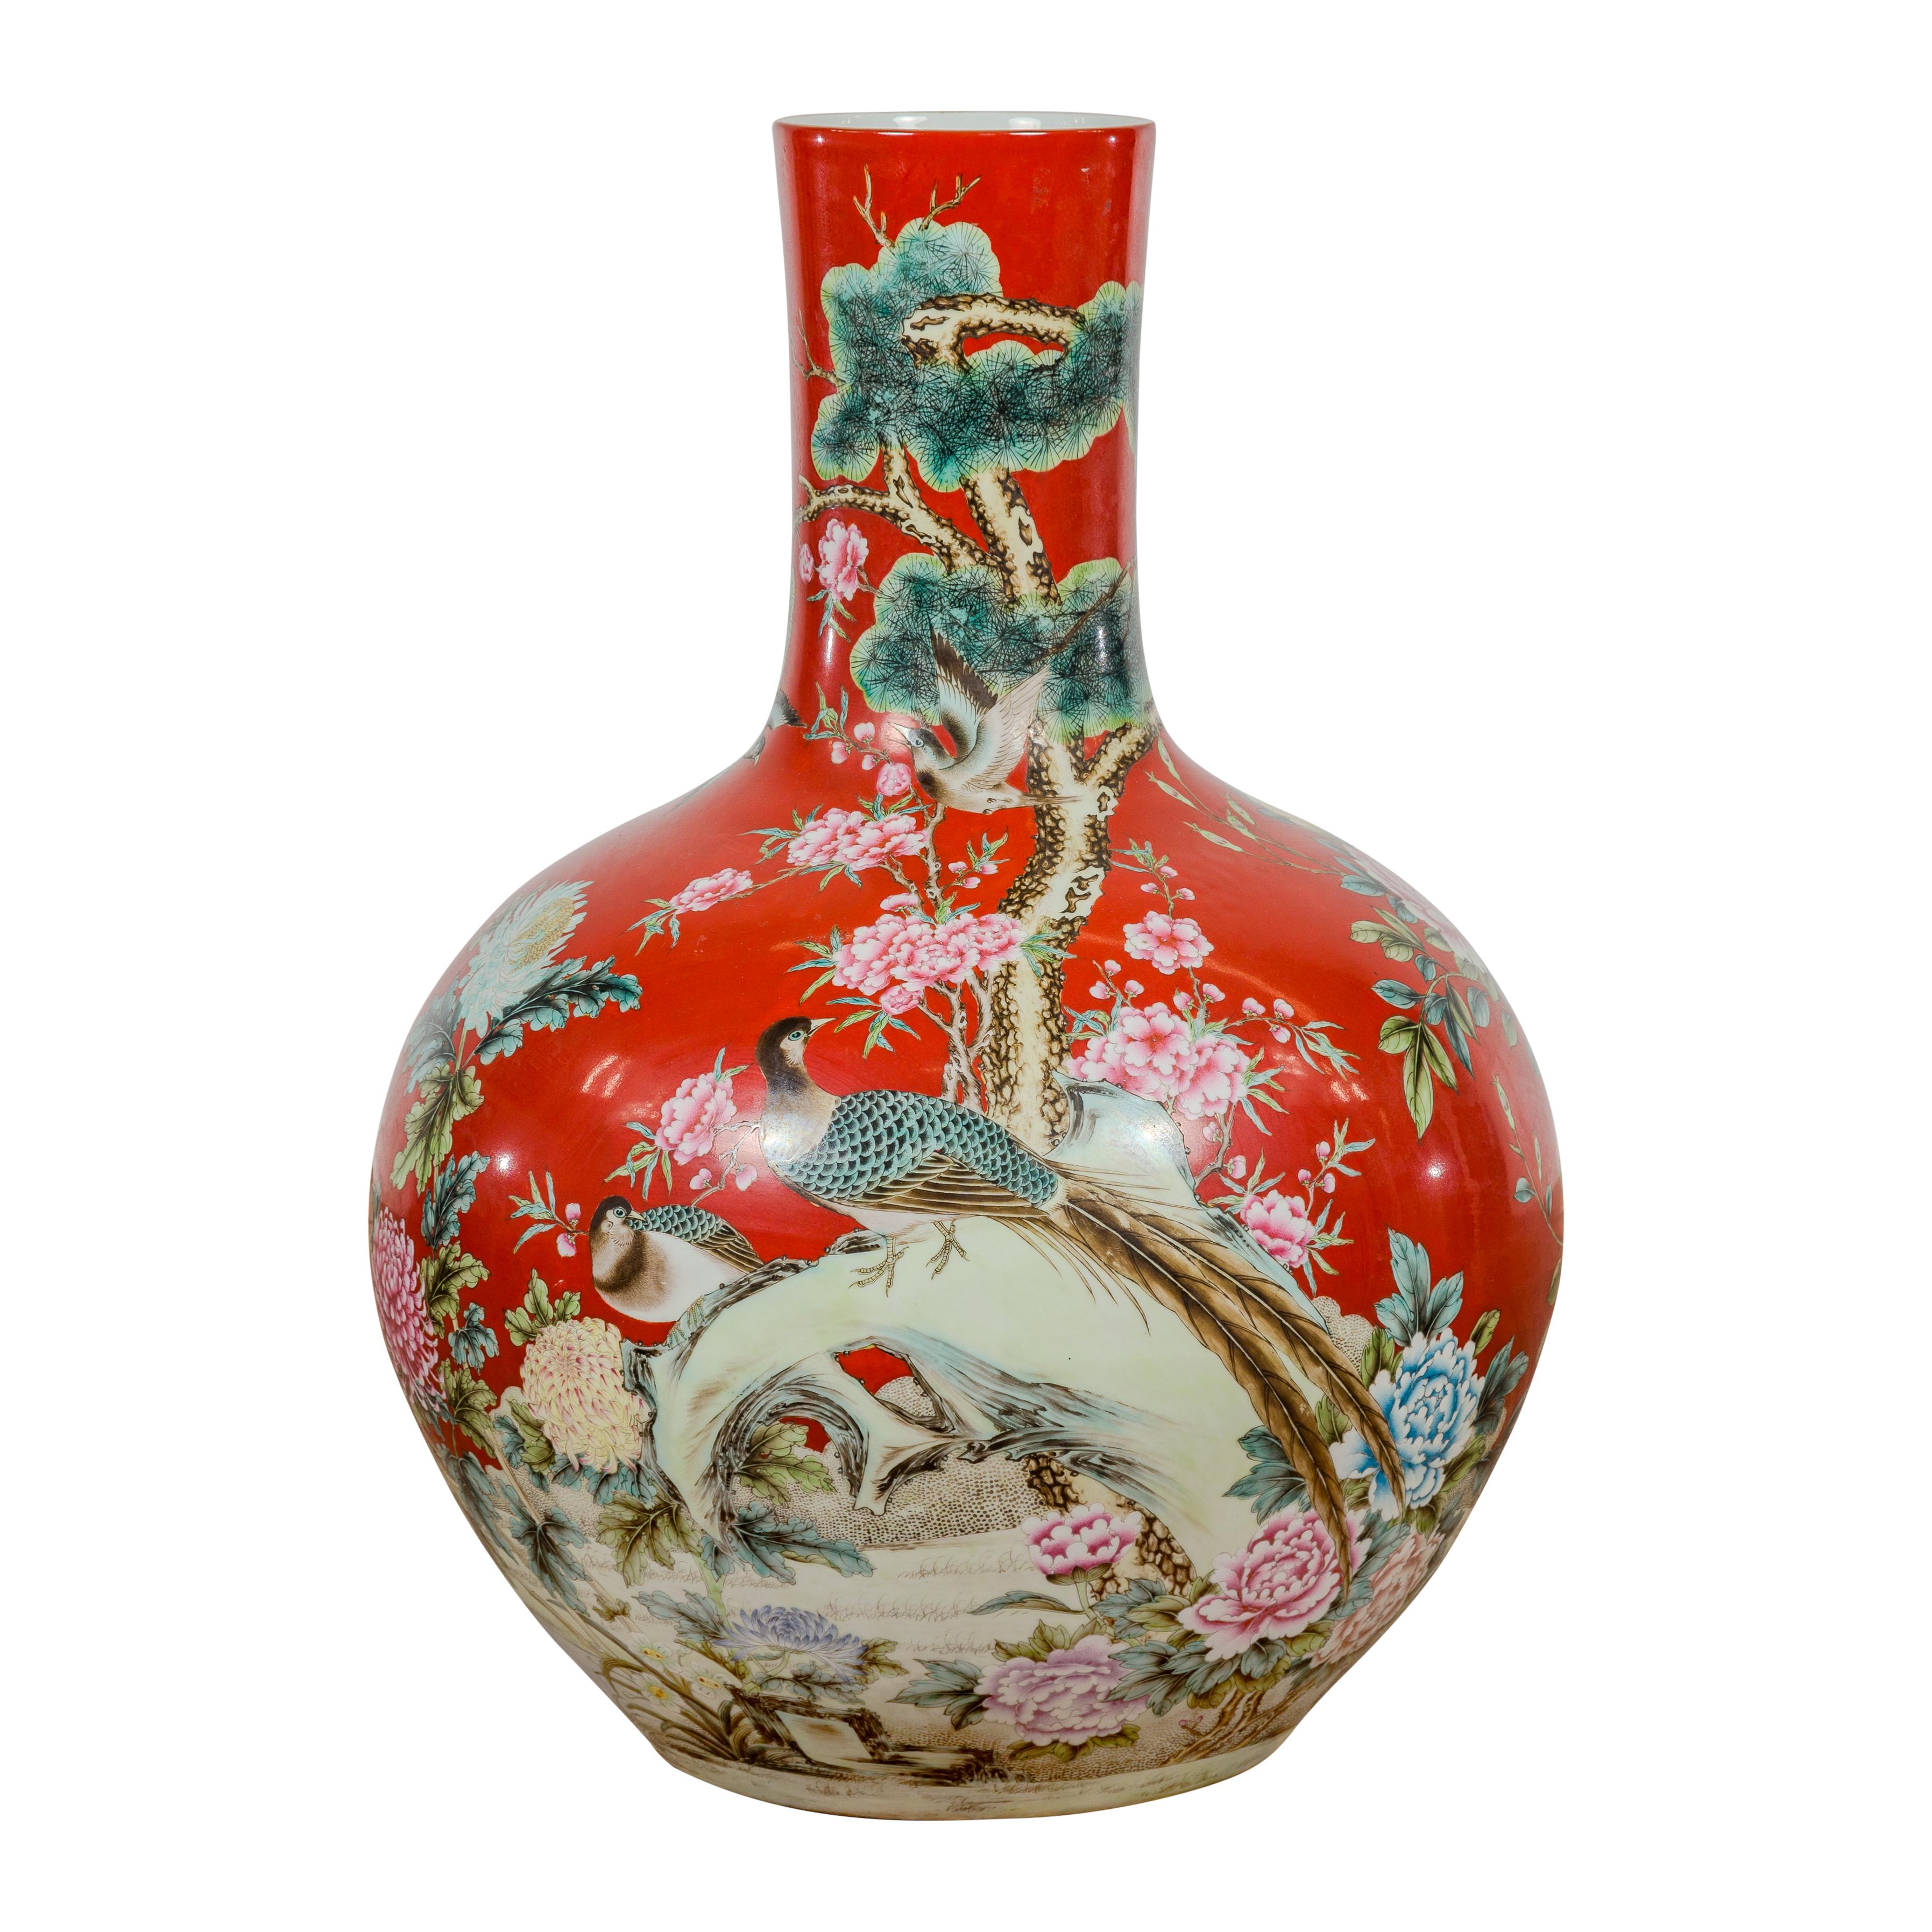 Kendi Style Midcentury Red Porcelain Vase with Hand-Painted Birds and Flowers For Sale 11